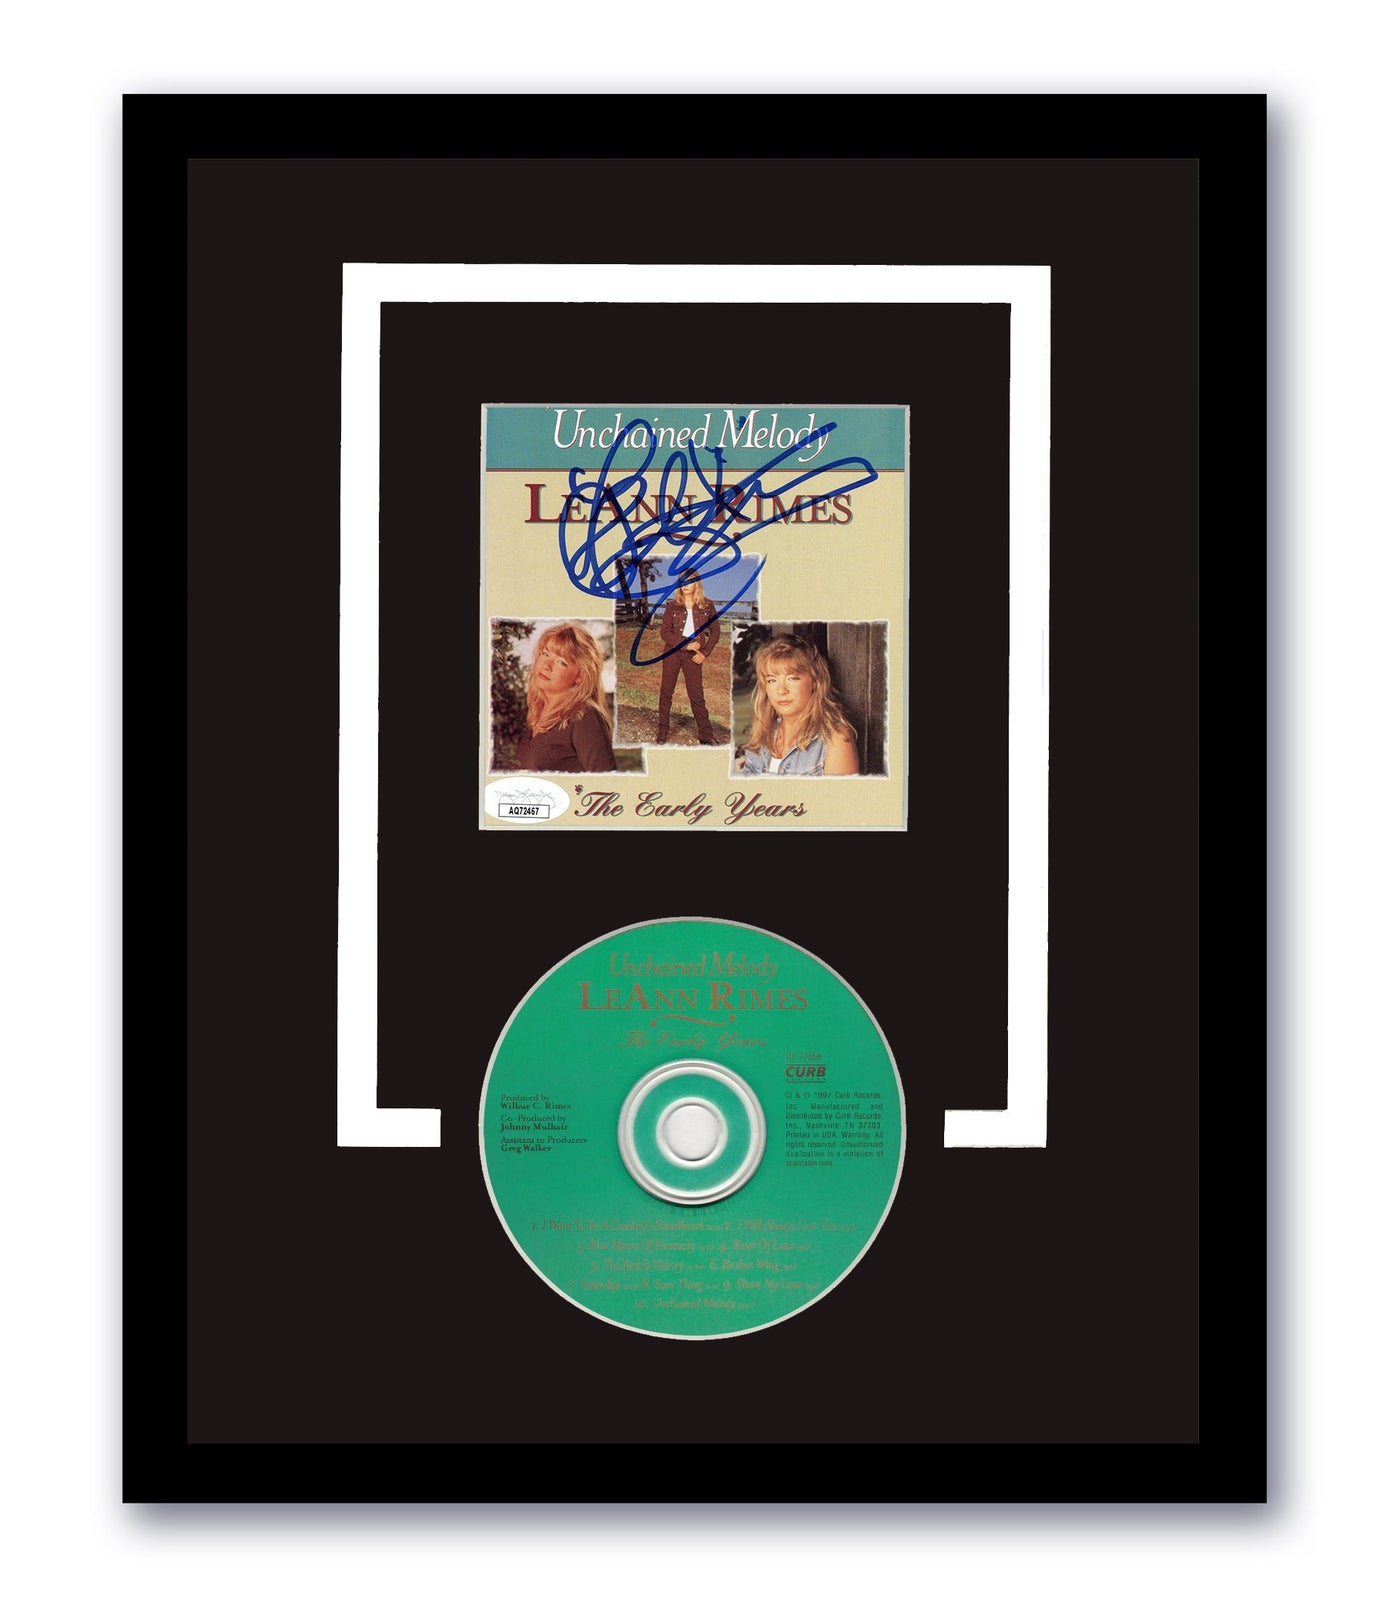 LeAnn Rimes Signed Unchained Melody Booklet Custom Framed Authentic Autograph JSA